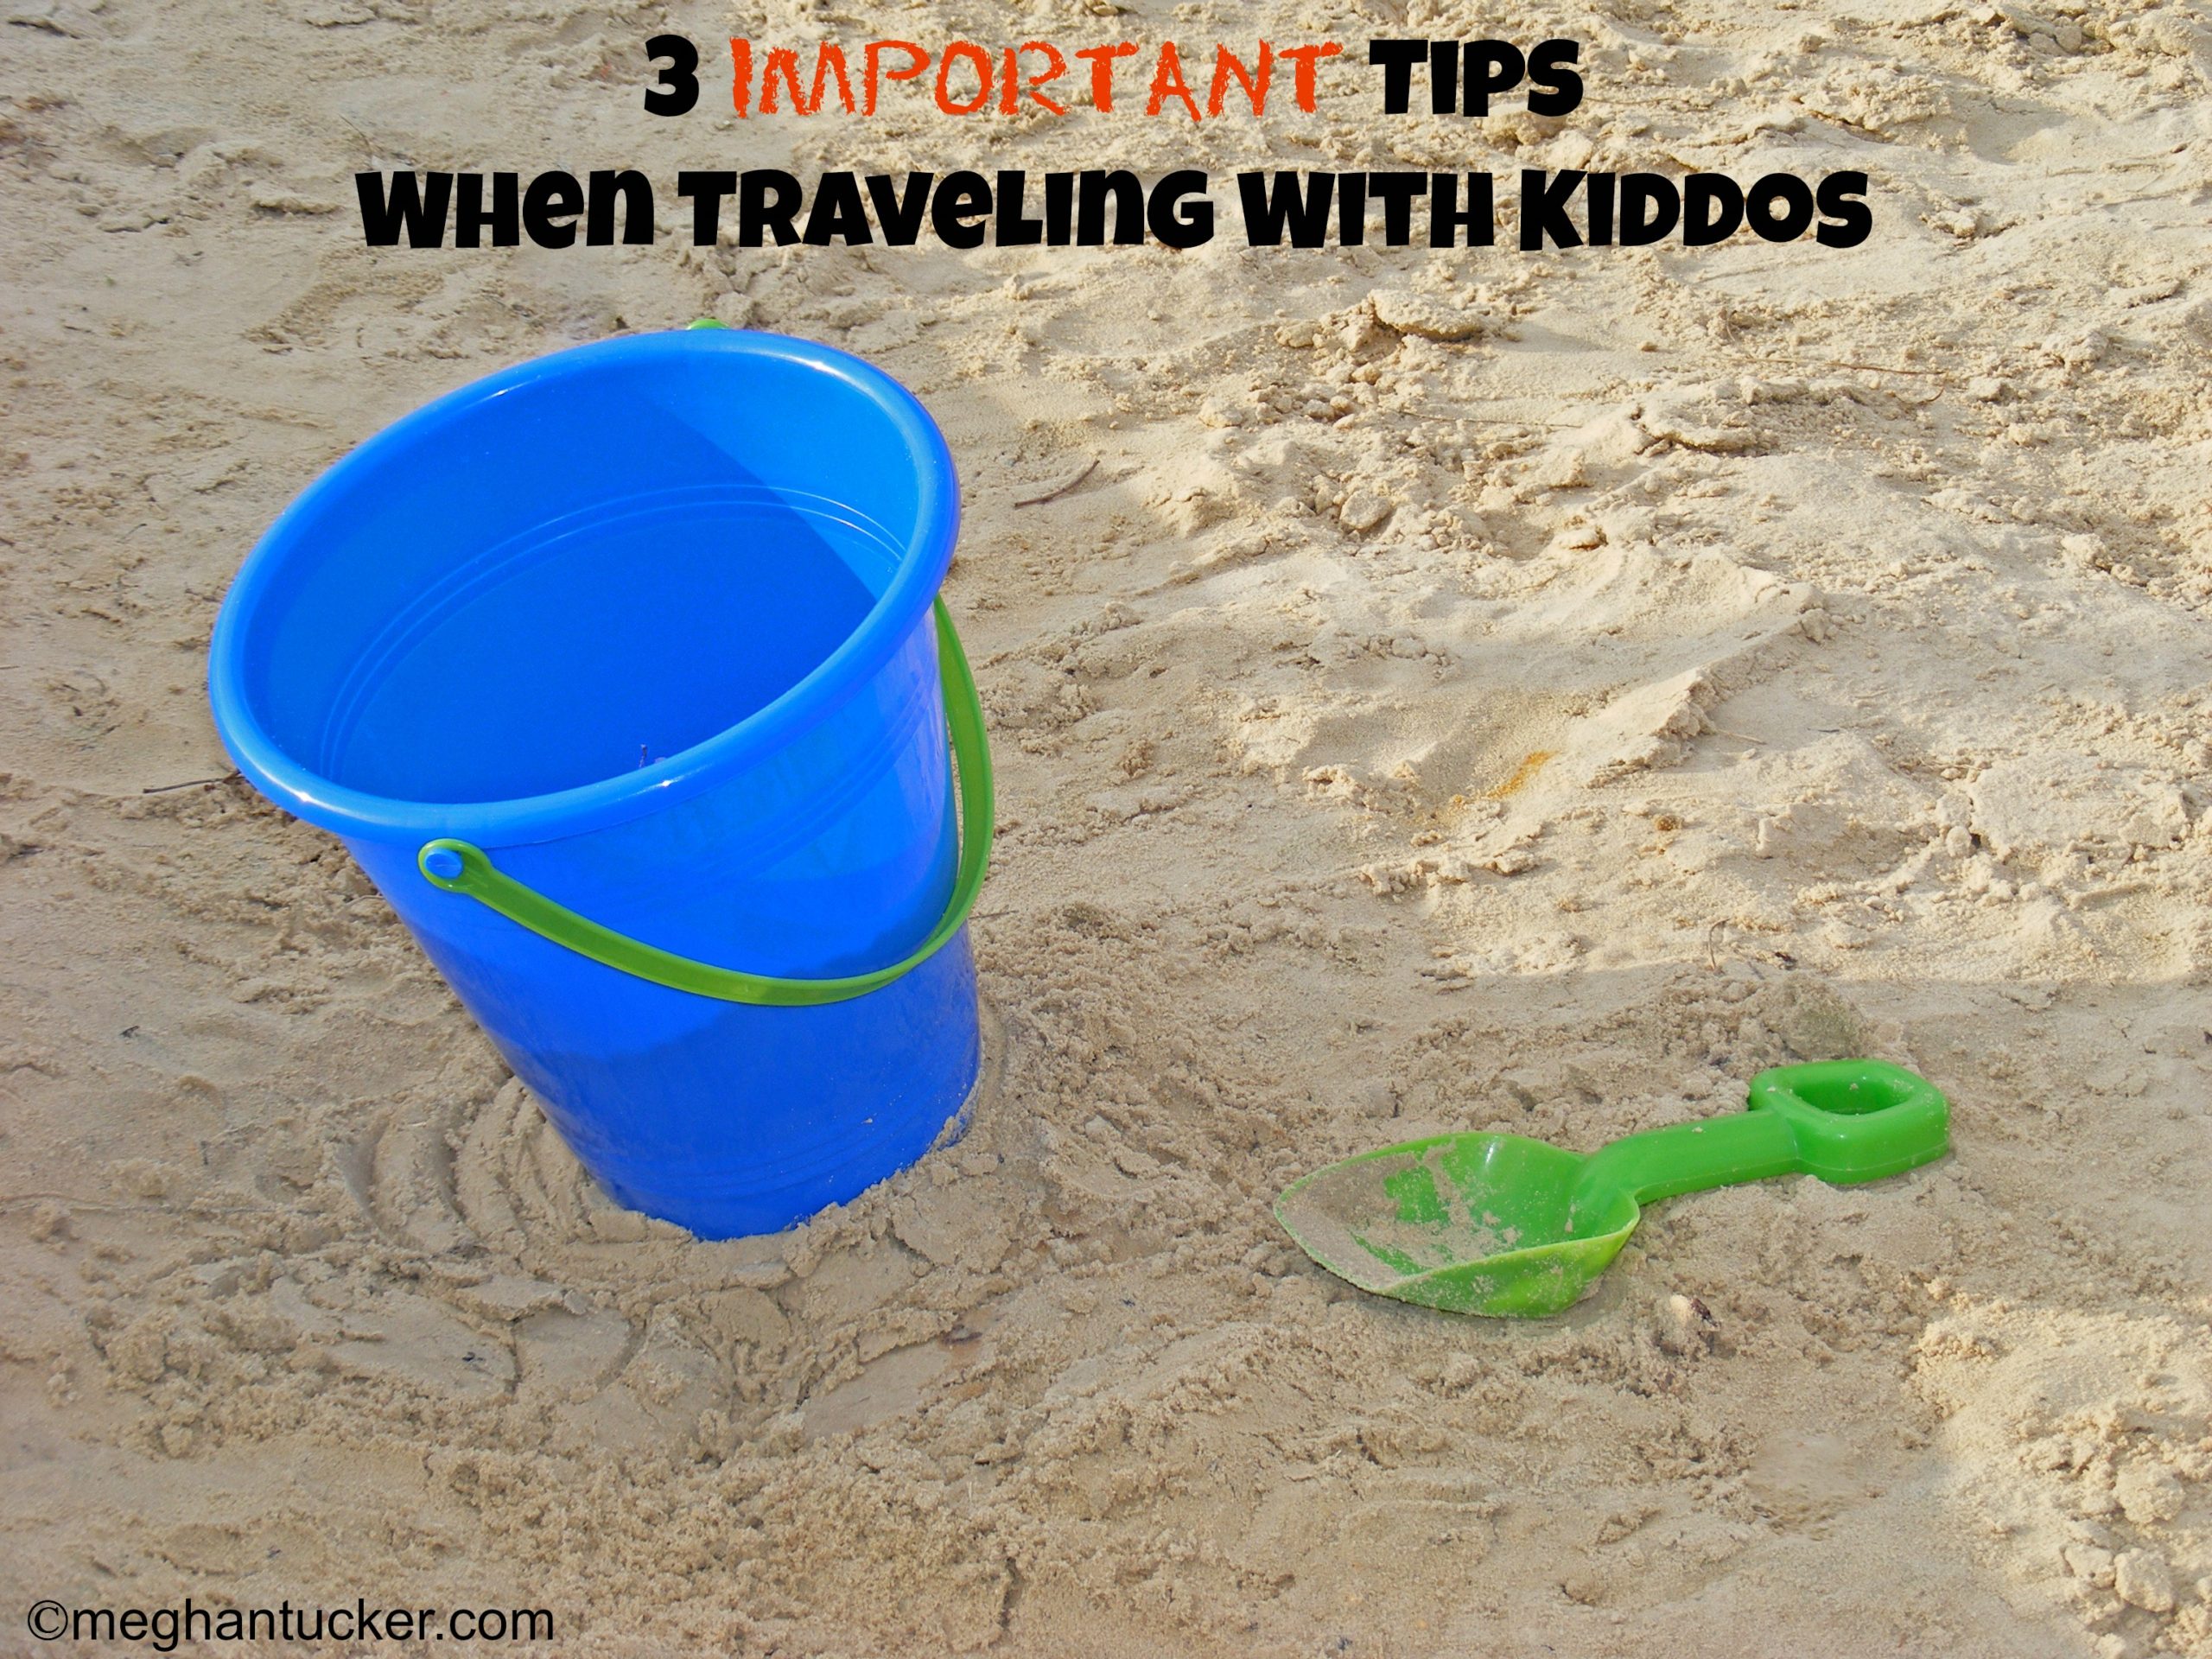 3 Important Tips For Traveling With Kids